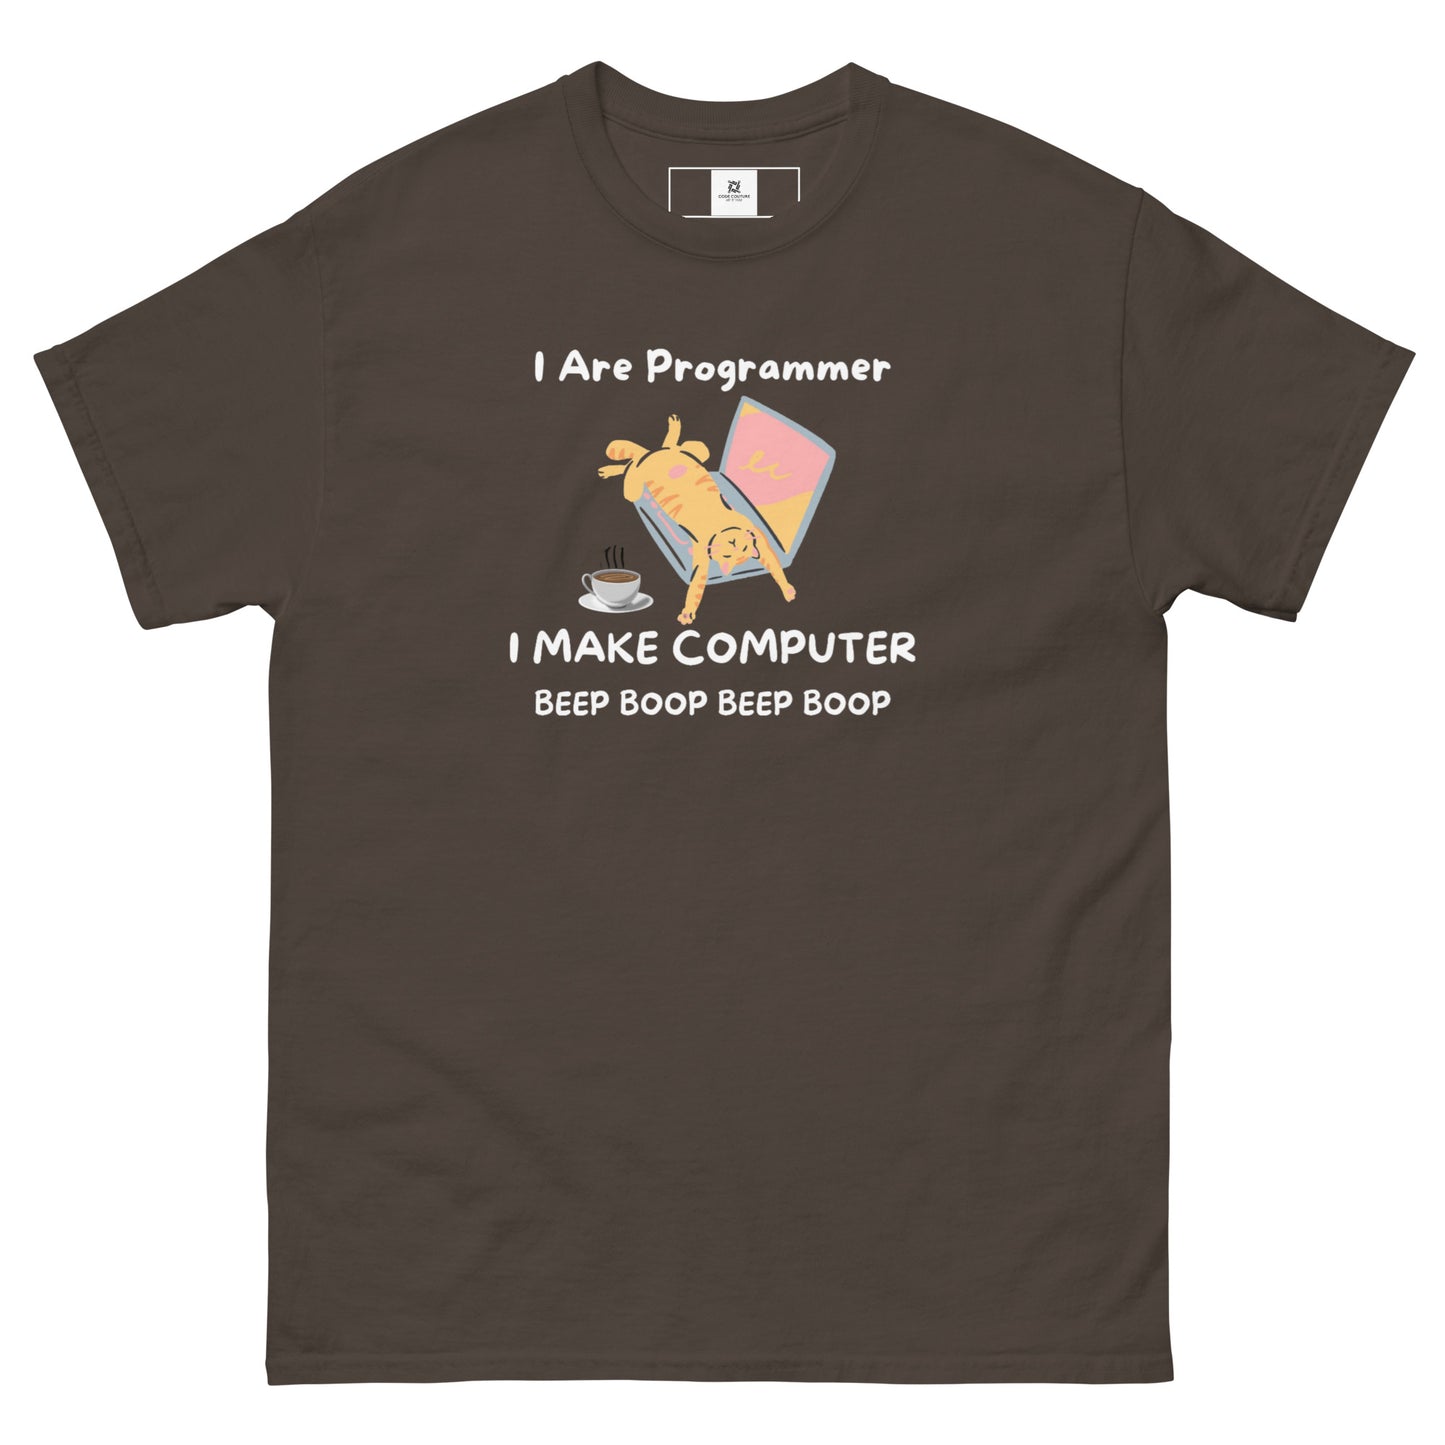 1 Are Programmer